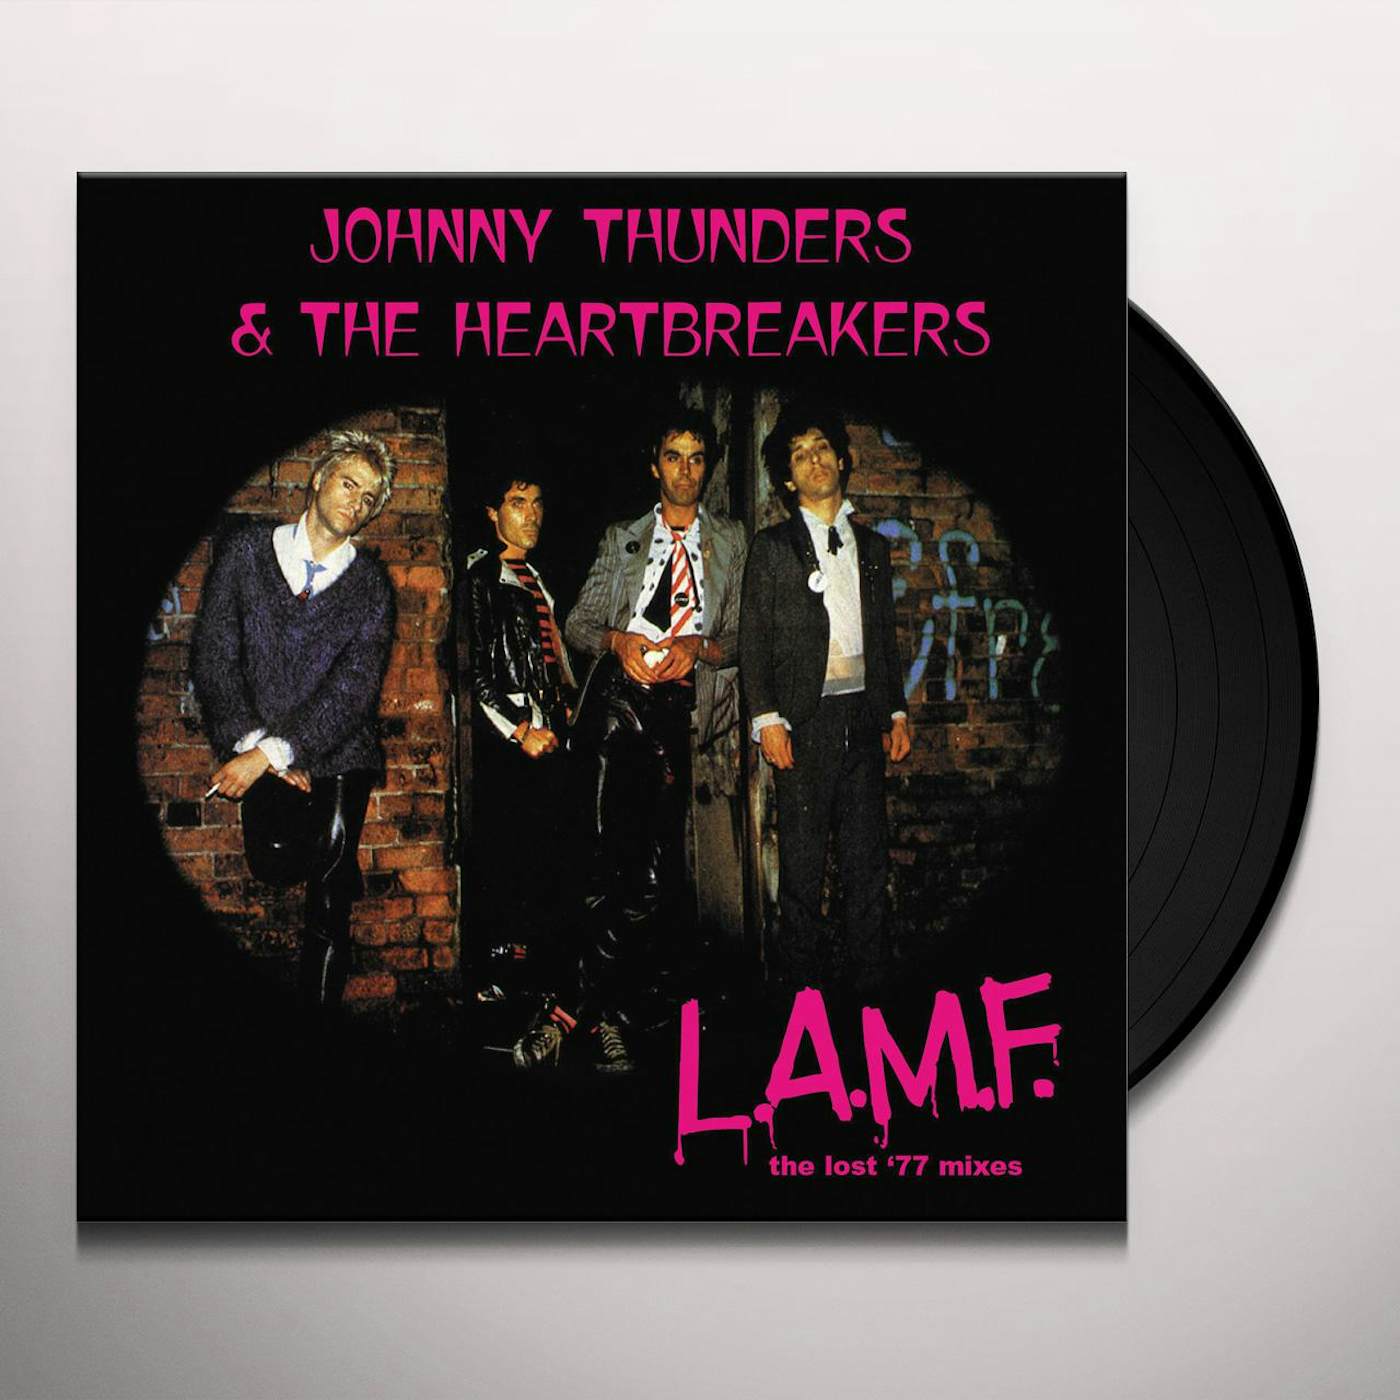 Johnny Thunders & The Heartbreakers L.A.M.F.: The Lost '77 Mixes Vinyl Record